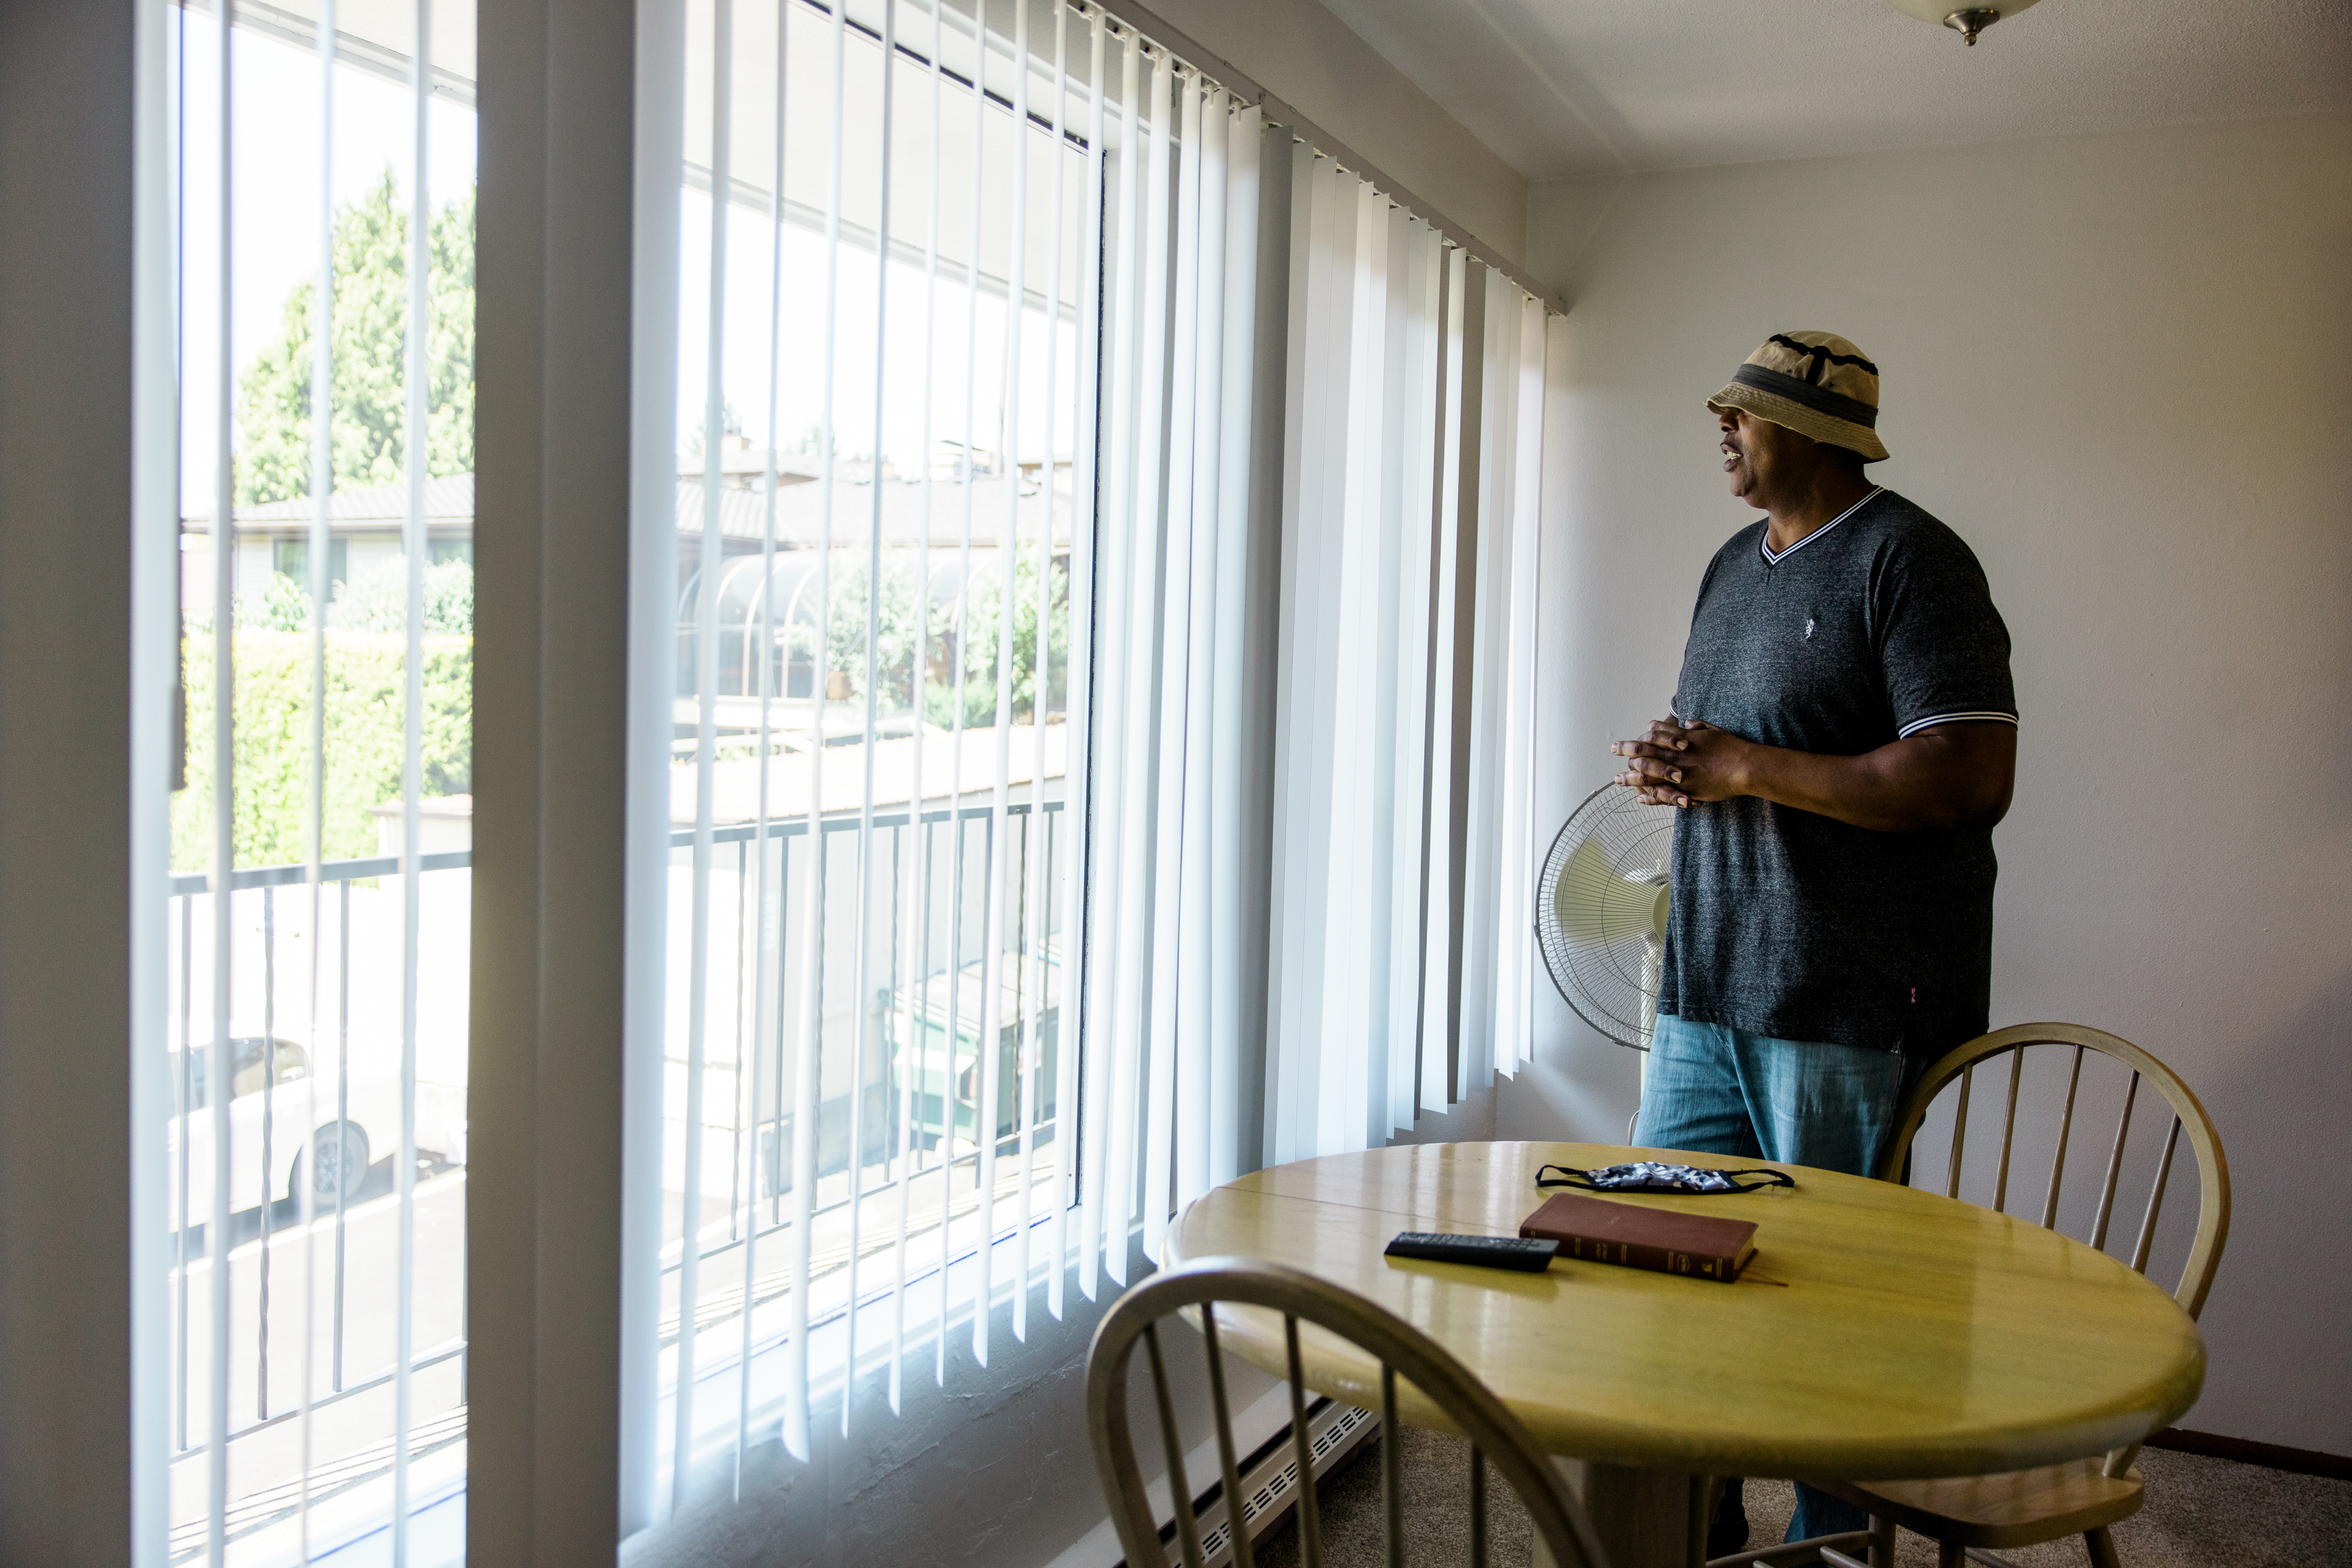 William Ingram, a veteran, is the first to be connected to safe and stable housing under a new King County program.